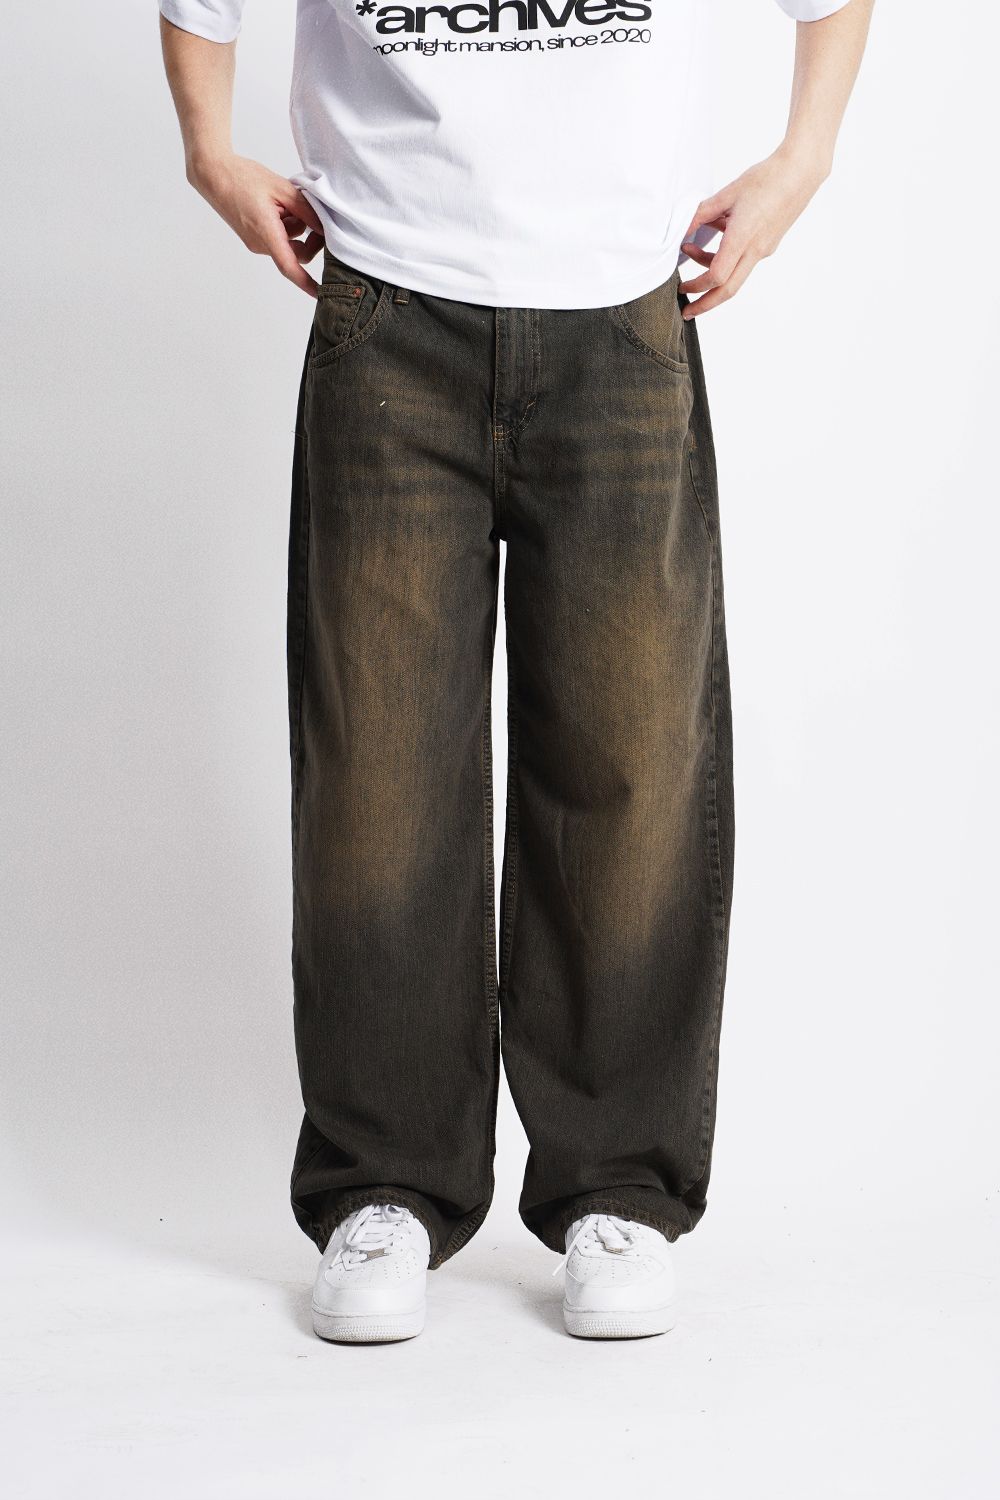 Brown Tint Loose Fit Jeans (URBN-B-178)